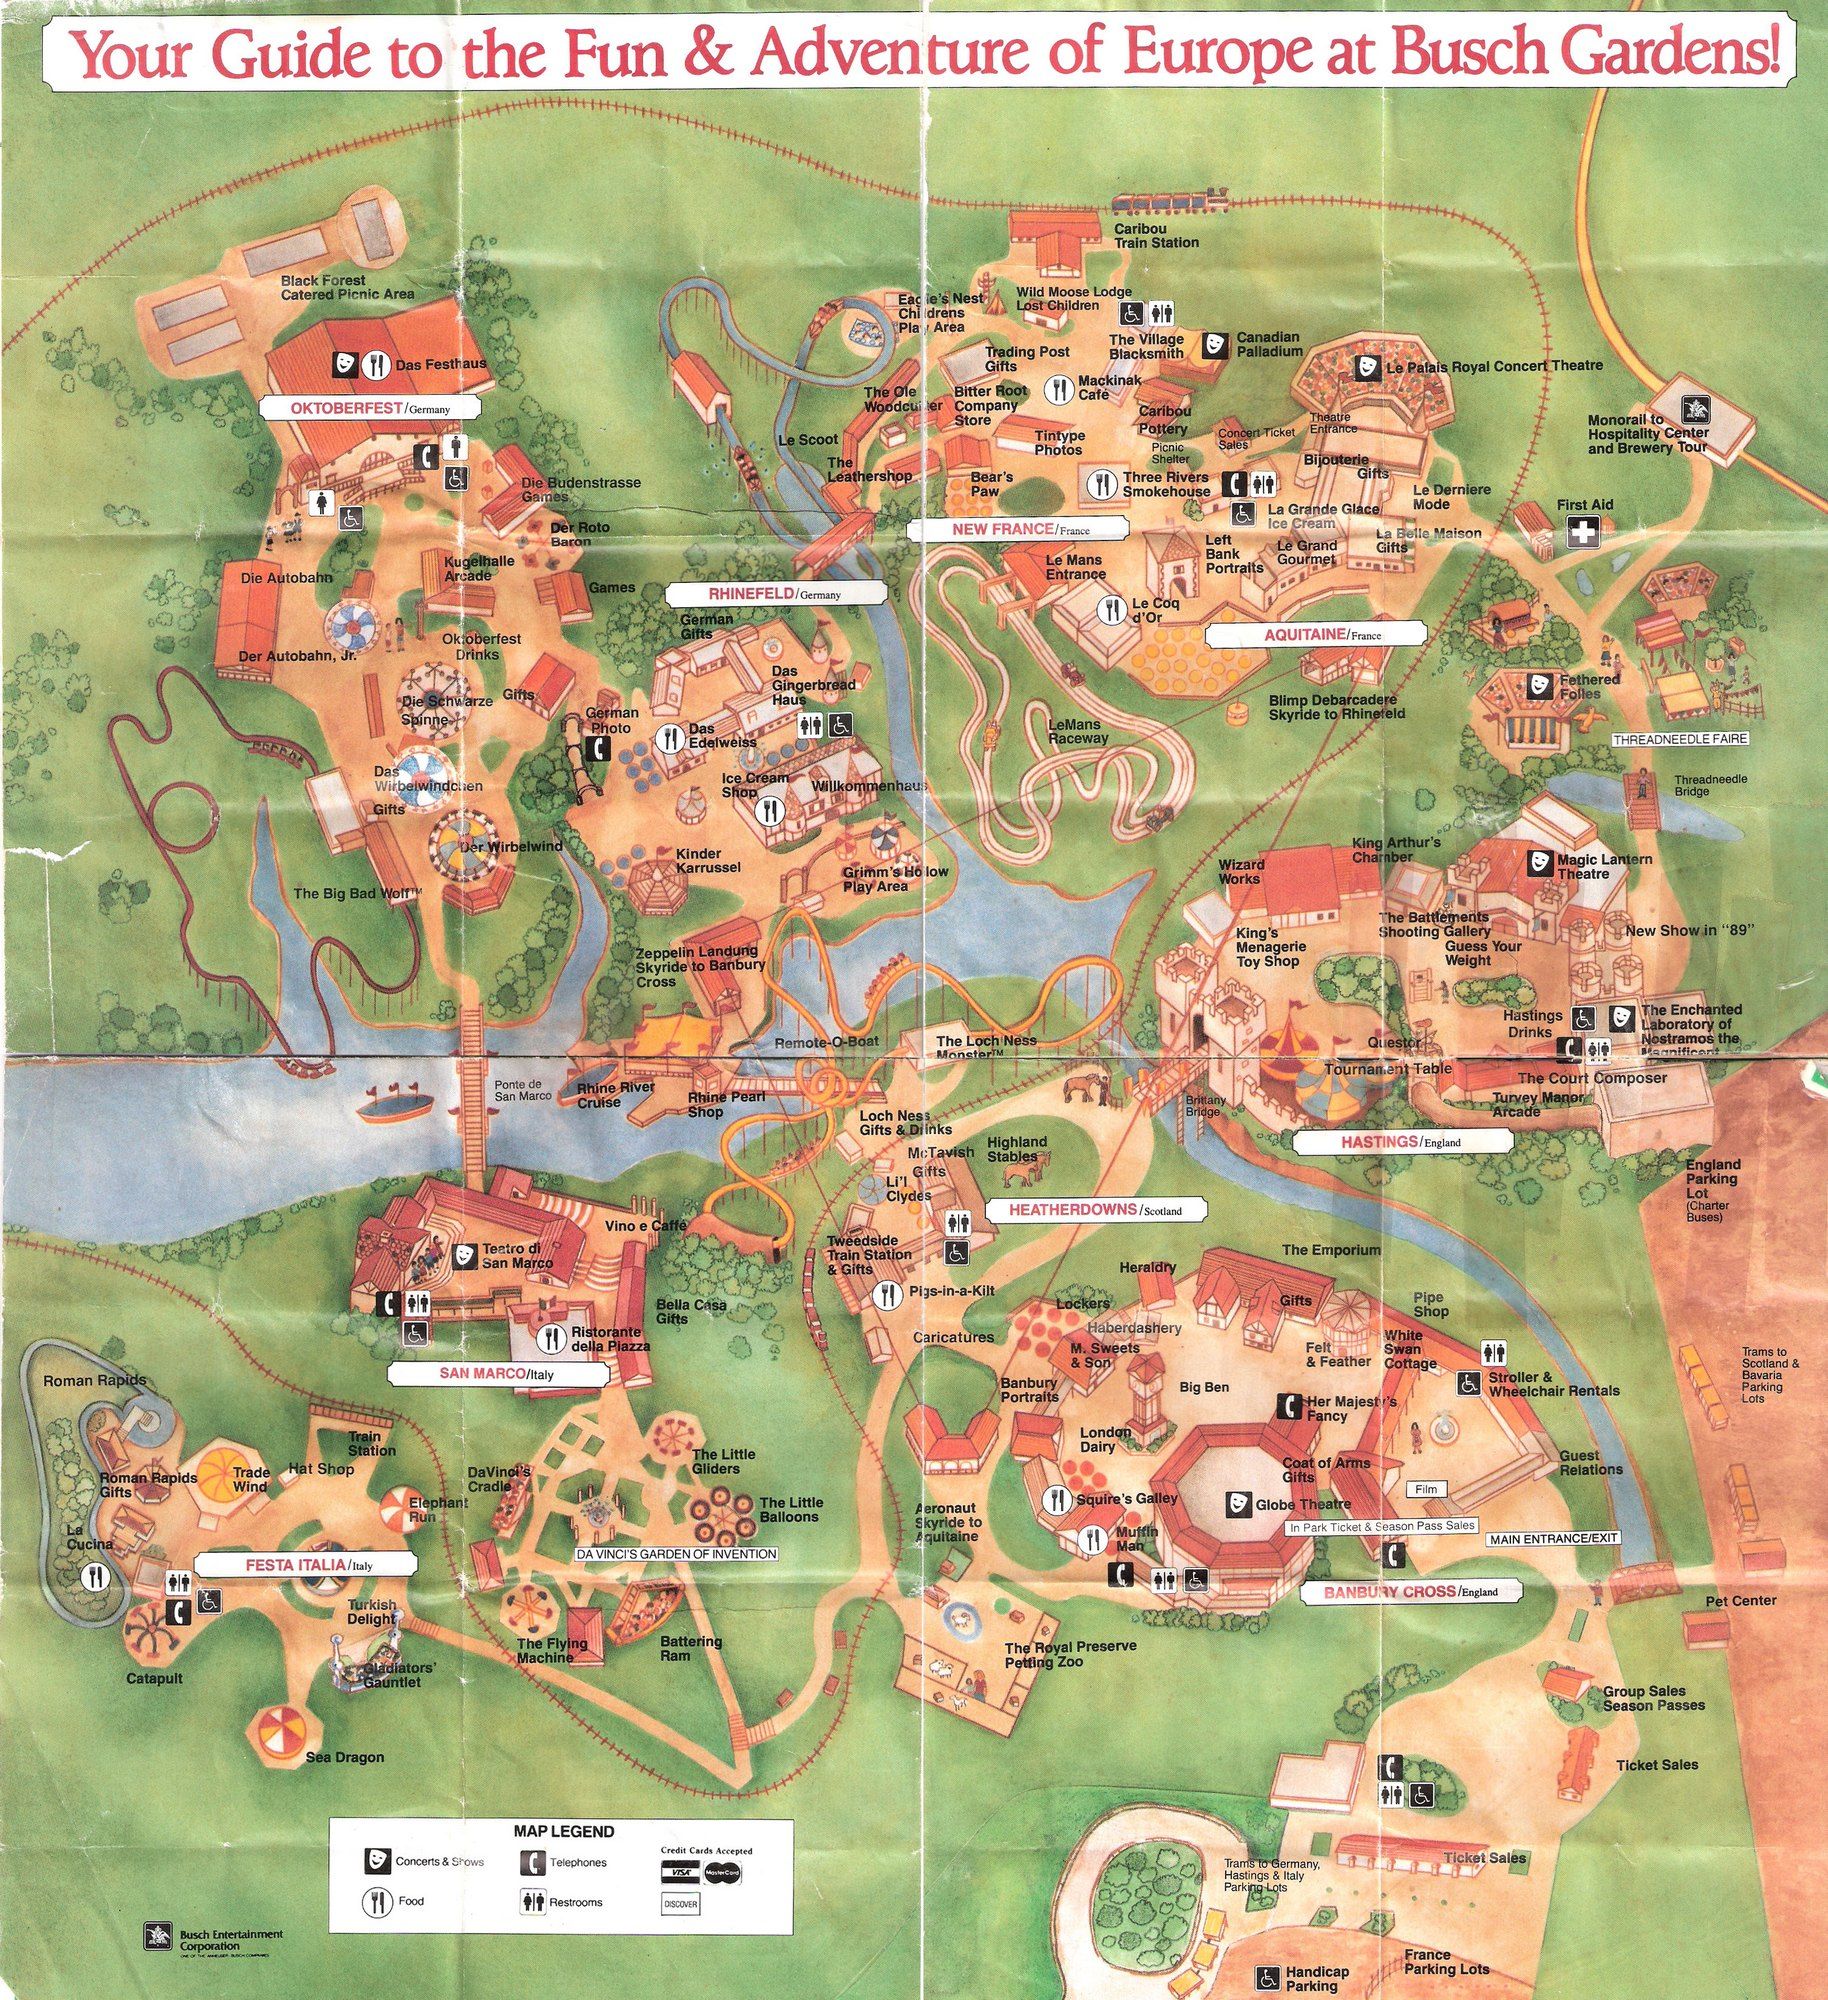 Park Map Busch Gardens The Old Country